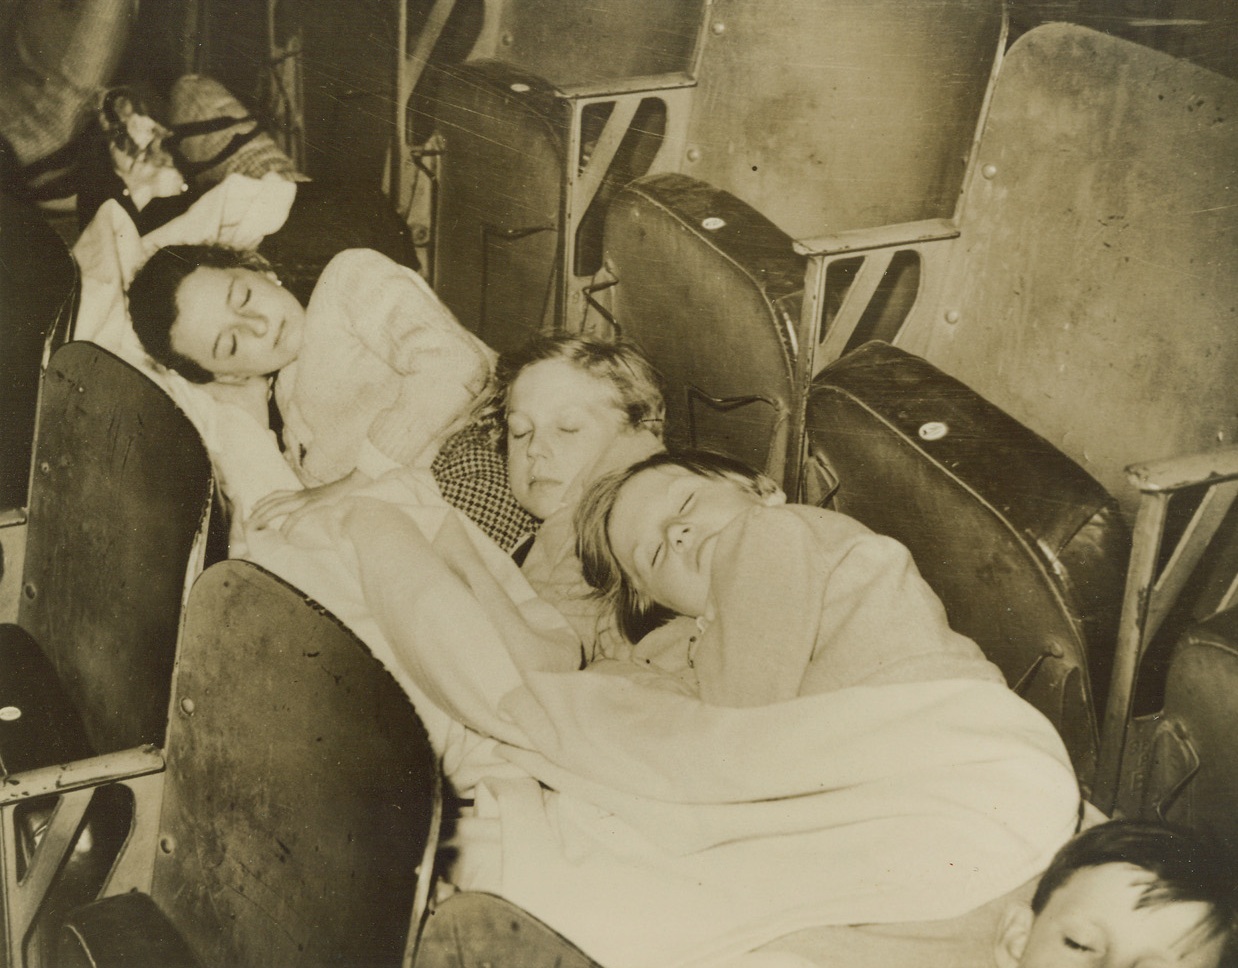 Theater of Rest. London – Weary Belgian refugee children sleeping on mattresses placed between rows of seats in London’s Empress Hall after a hazardous flight from their war-torn homes. (Photo flown to New York by Clipper) Credit: ACME;